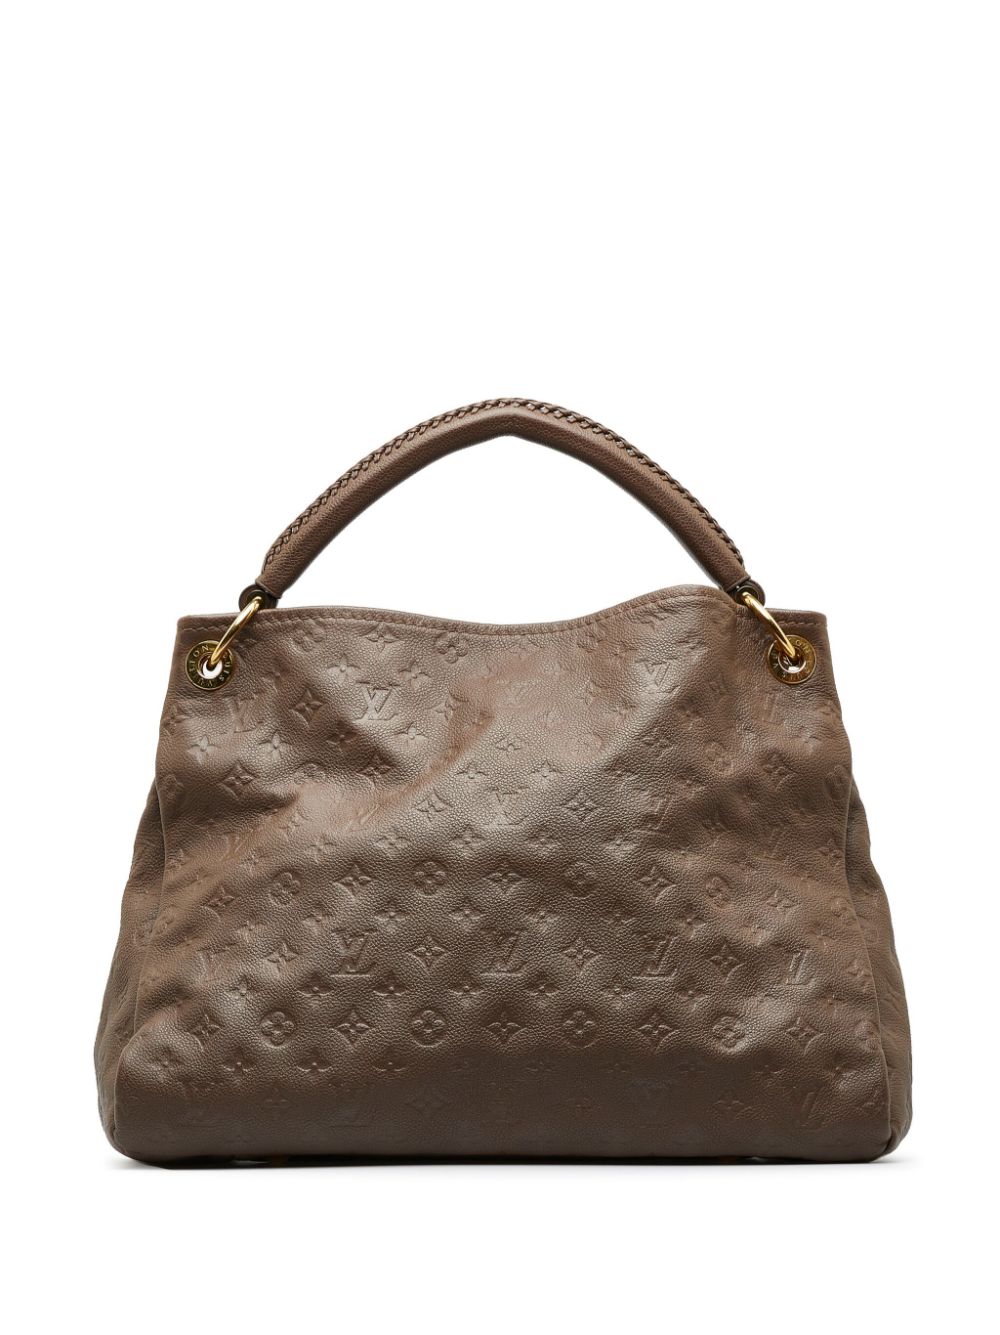 Louis Vuitton pre-owned Artsy MM tote bag - Bruin